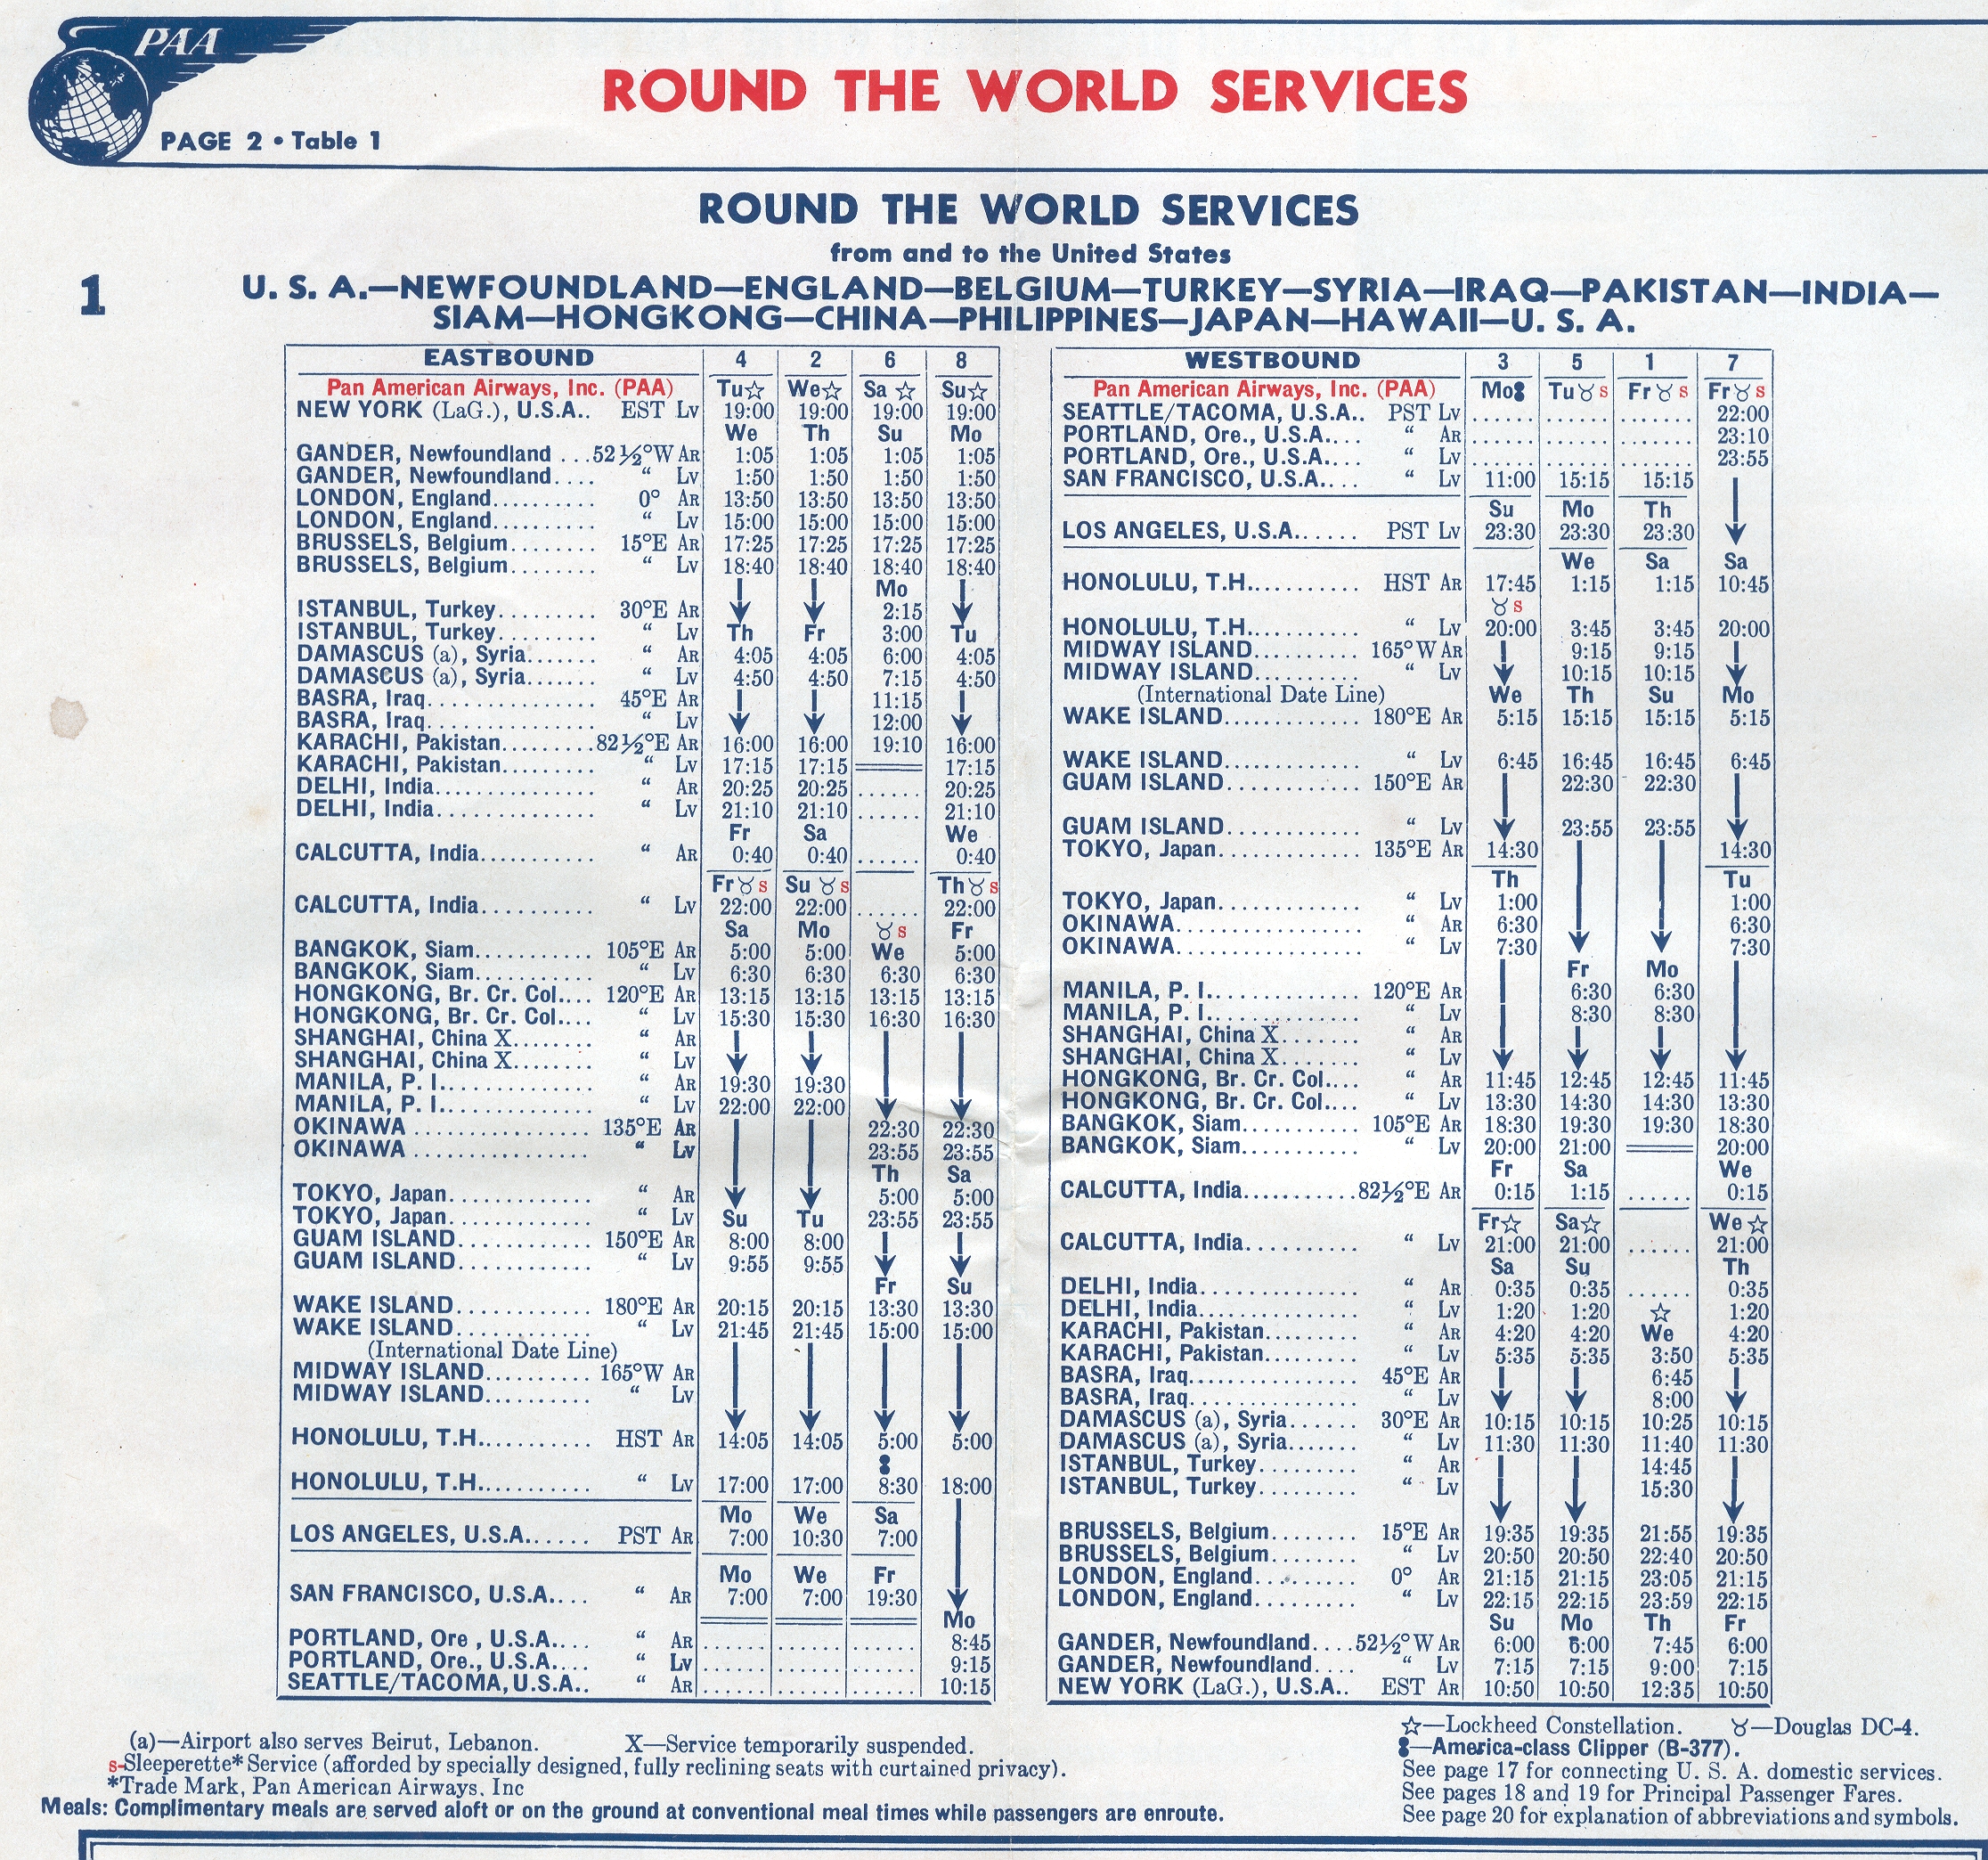 1949, July 1, Pan Am's Rountd- The  - World schedule.